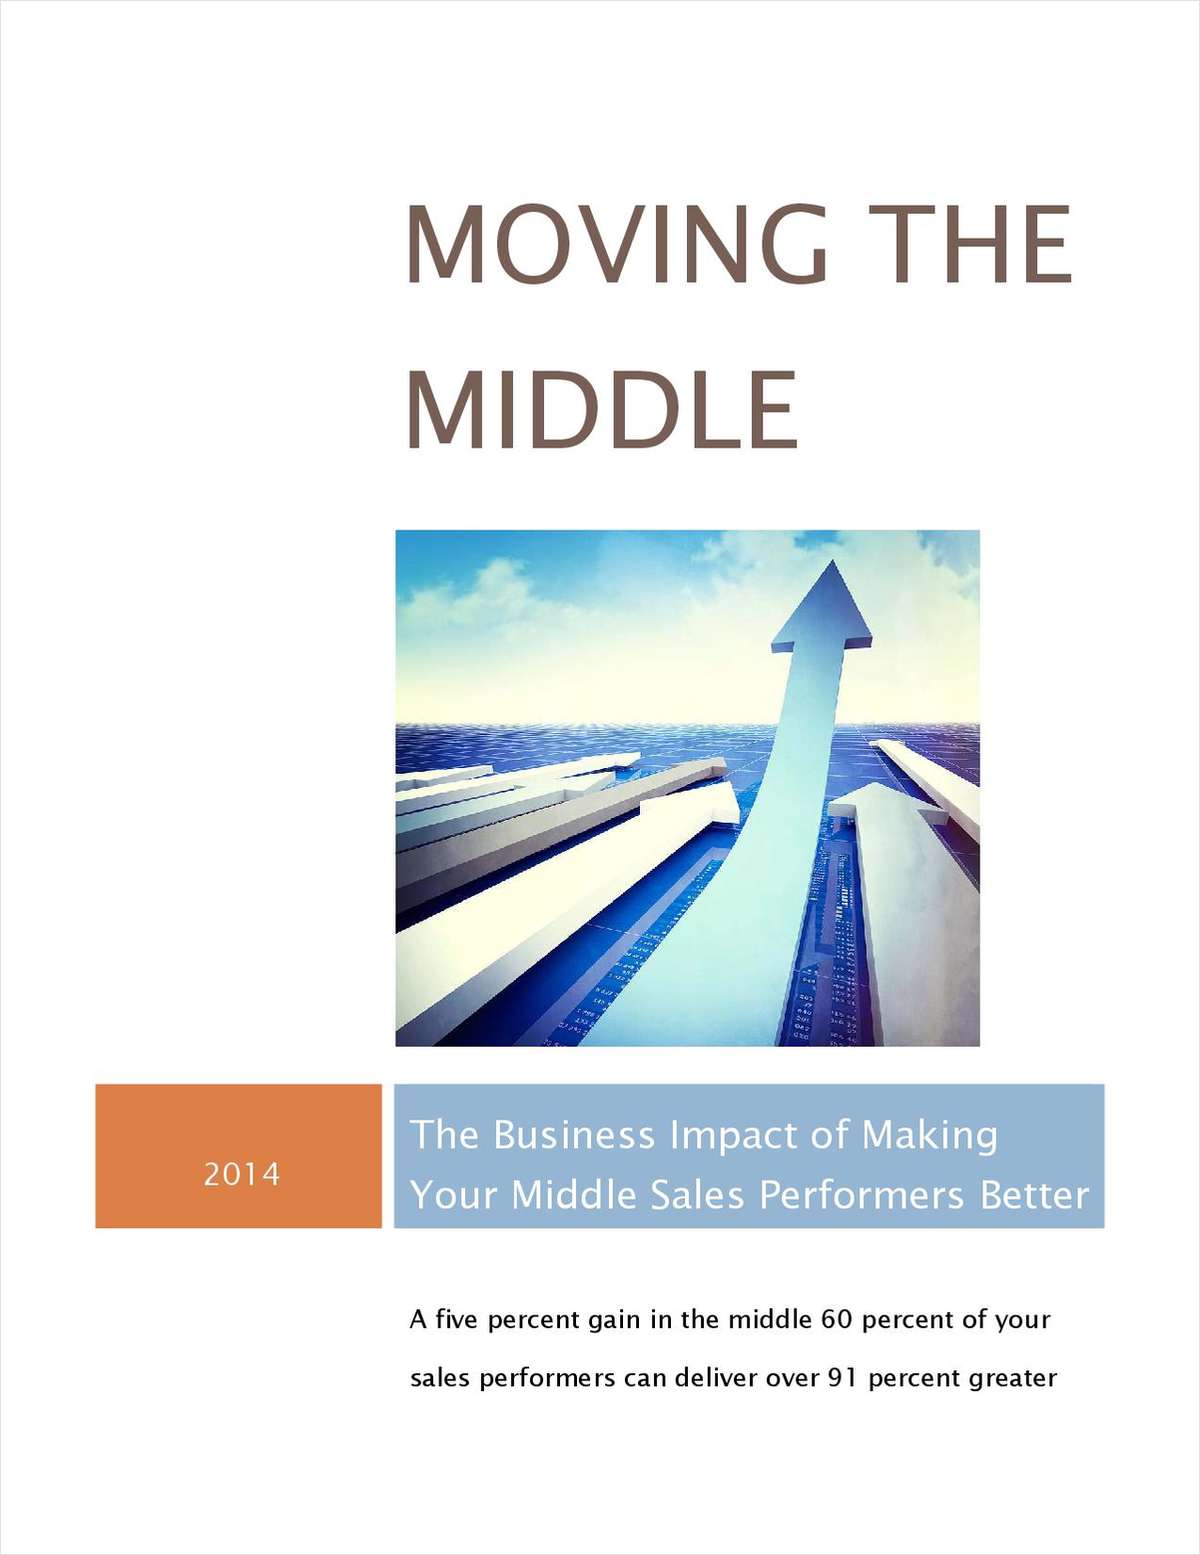 Moving the Middle: The Business Impact of Making Your Middle Sales Performers Better